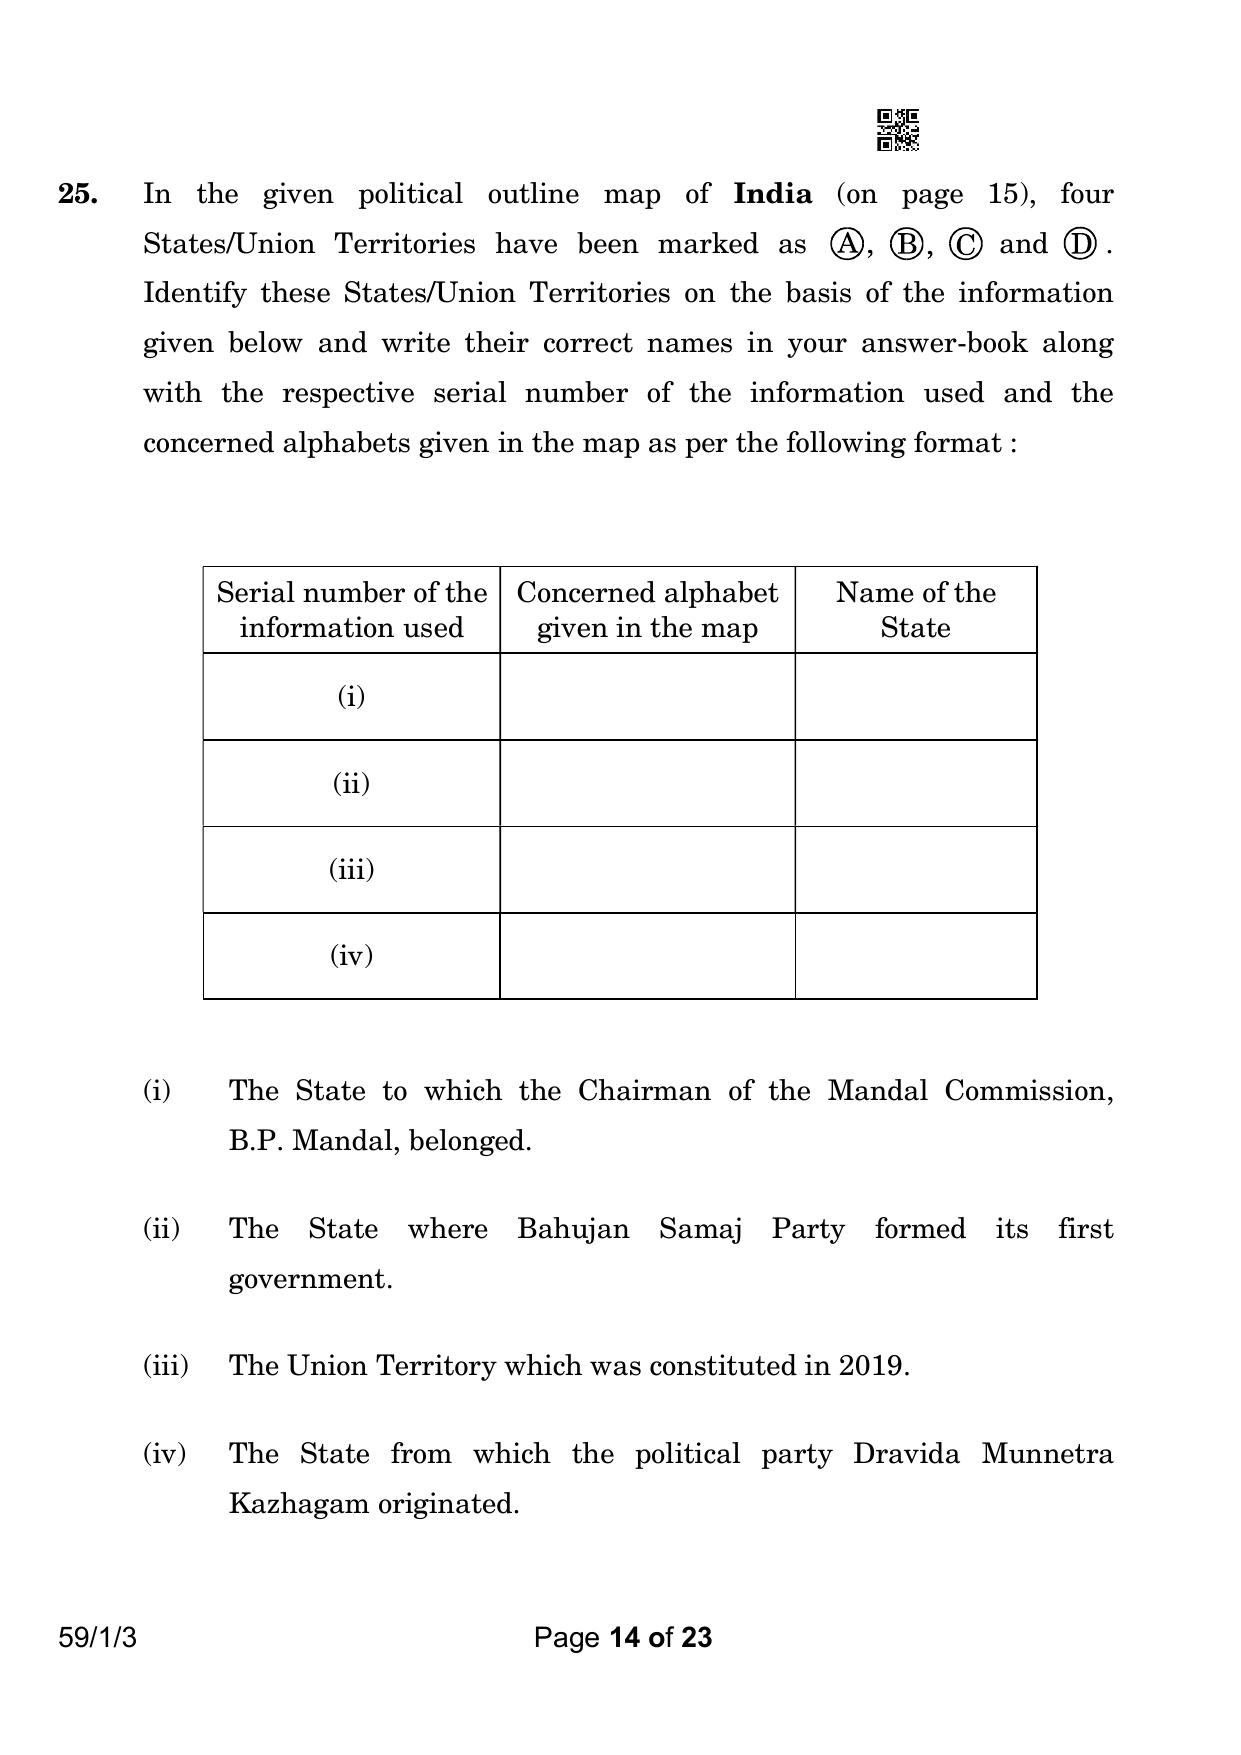 CBSE Class 12 59-1-3 Political Science 2023 Question Paper - Page 14